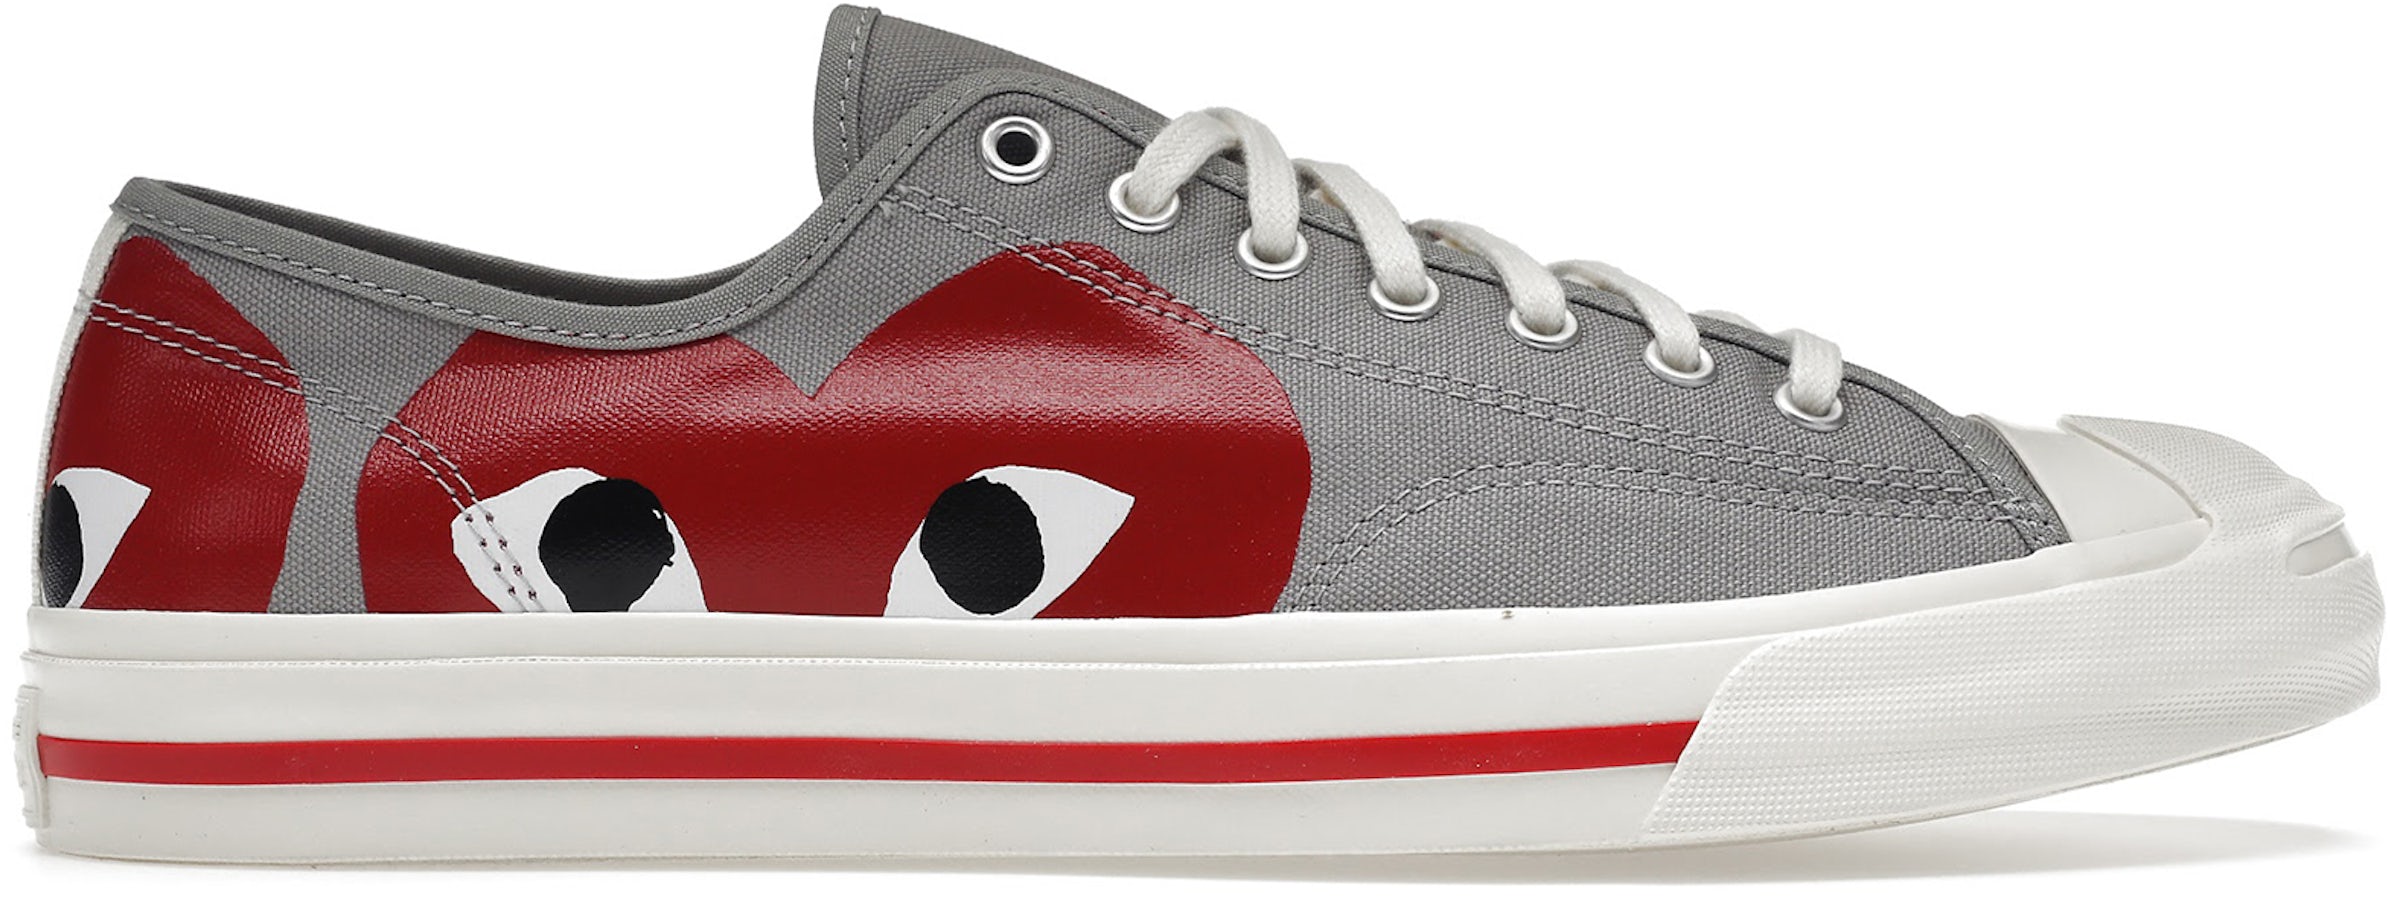 Converse Purcell Comme des Garcons Grey Red メンズ - 171260C - JP